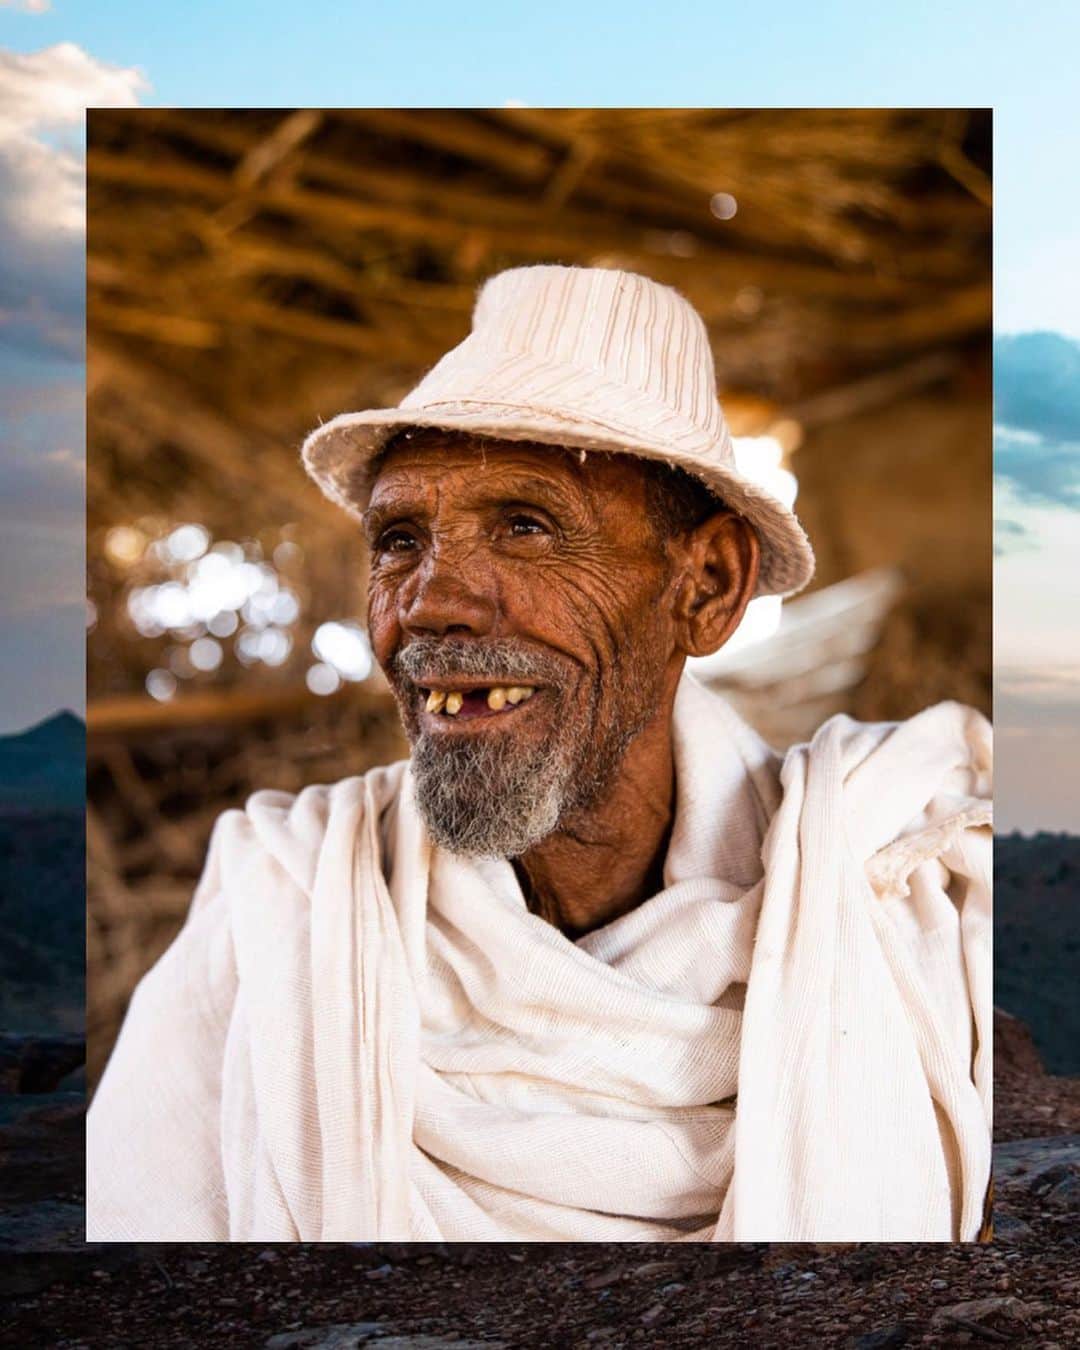 Cubby Grahamのインスタグラム：「74-year-old Tadese is one of the kindest and most lovable people you’ll ever meet. ⠀ He shared about the change he’s seen in his community since receiving clean water two and a half years ago. ⠀ “We have transitioned from the darkest life to the brightest life,” he told us. “We won the lottery.”‬ ⠀ #charitywaterethiopia」